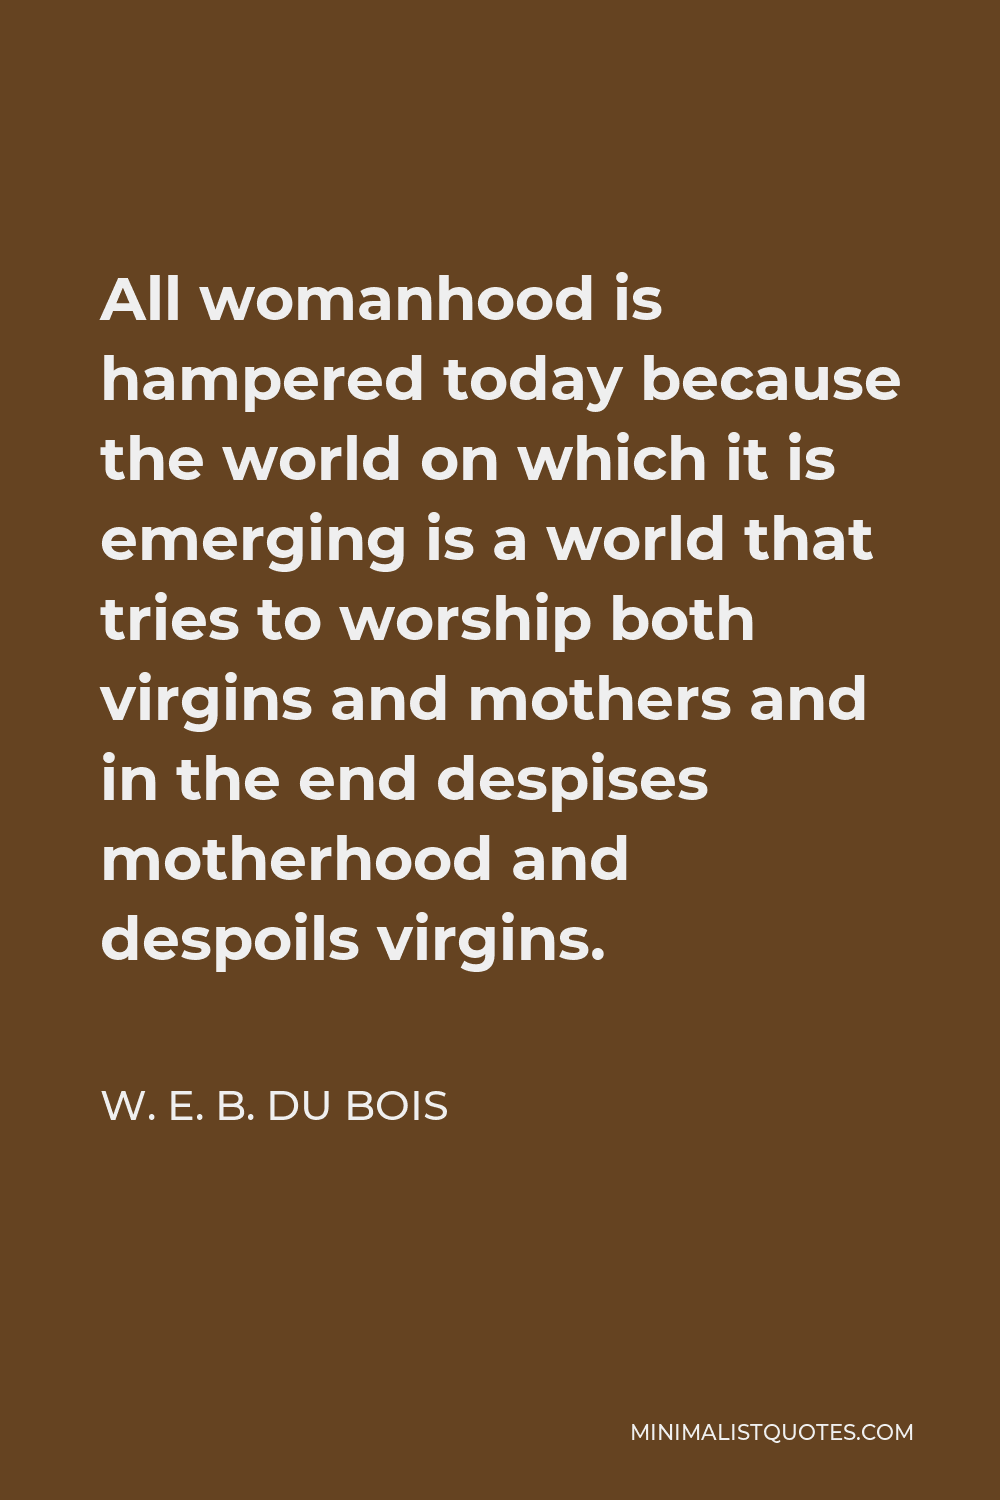 W. E. B. Du Bois Quote - All womanhood is hampered today because the world on which it is emerging is a world that tries to worship both virgins and mothers and in the end despises motherhood and despoils virgins.